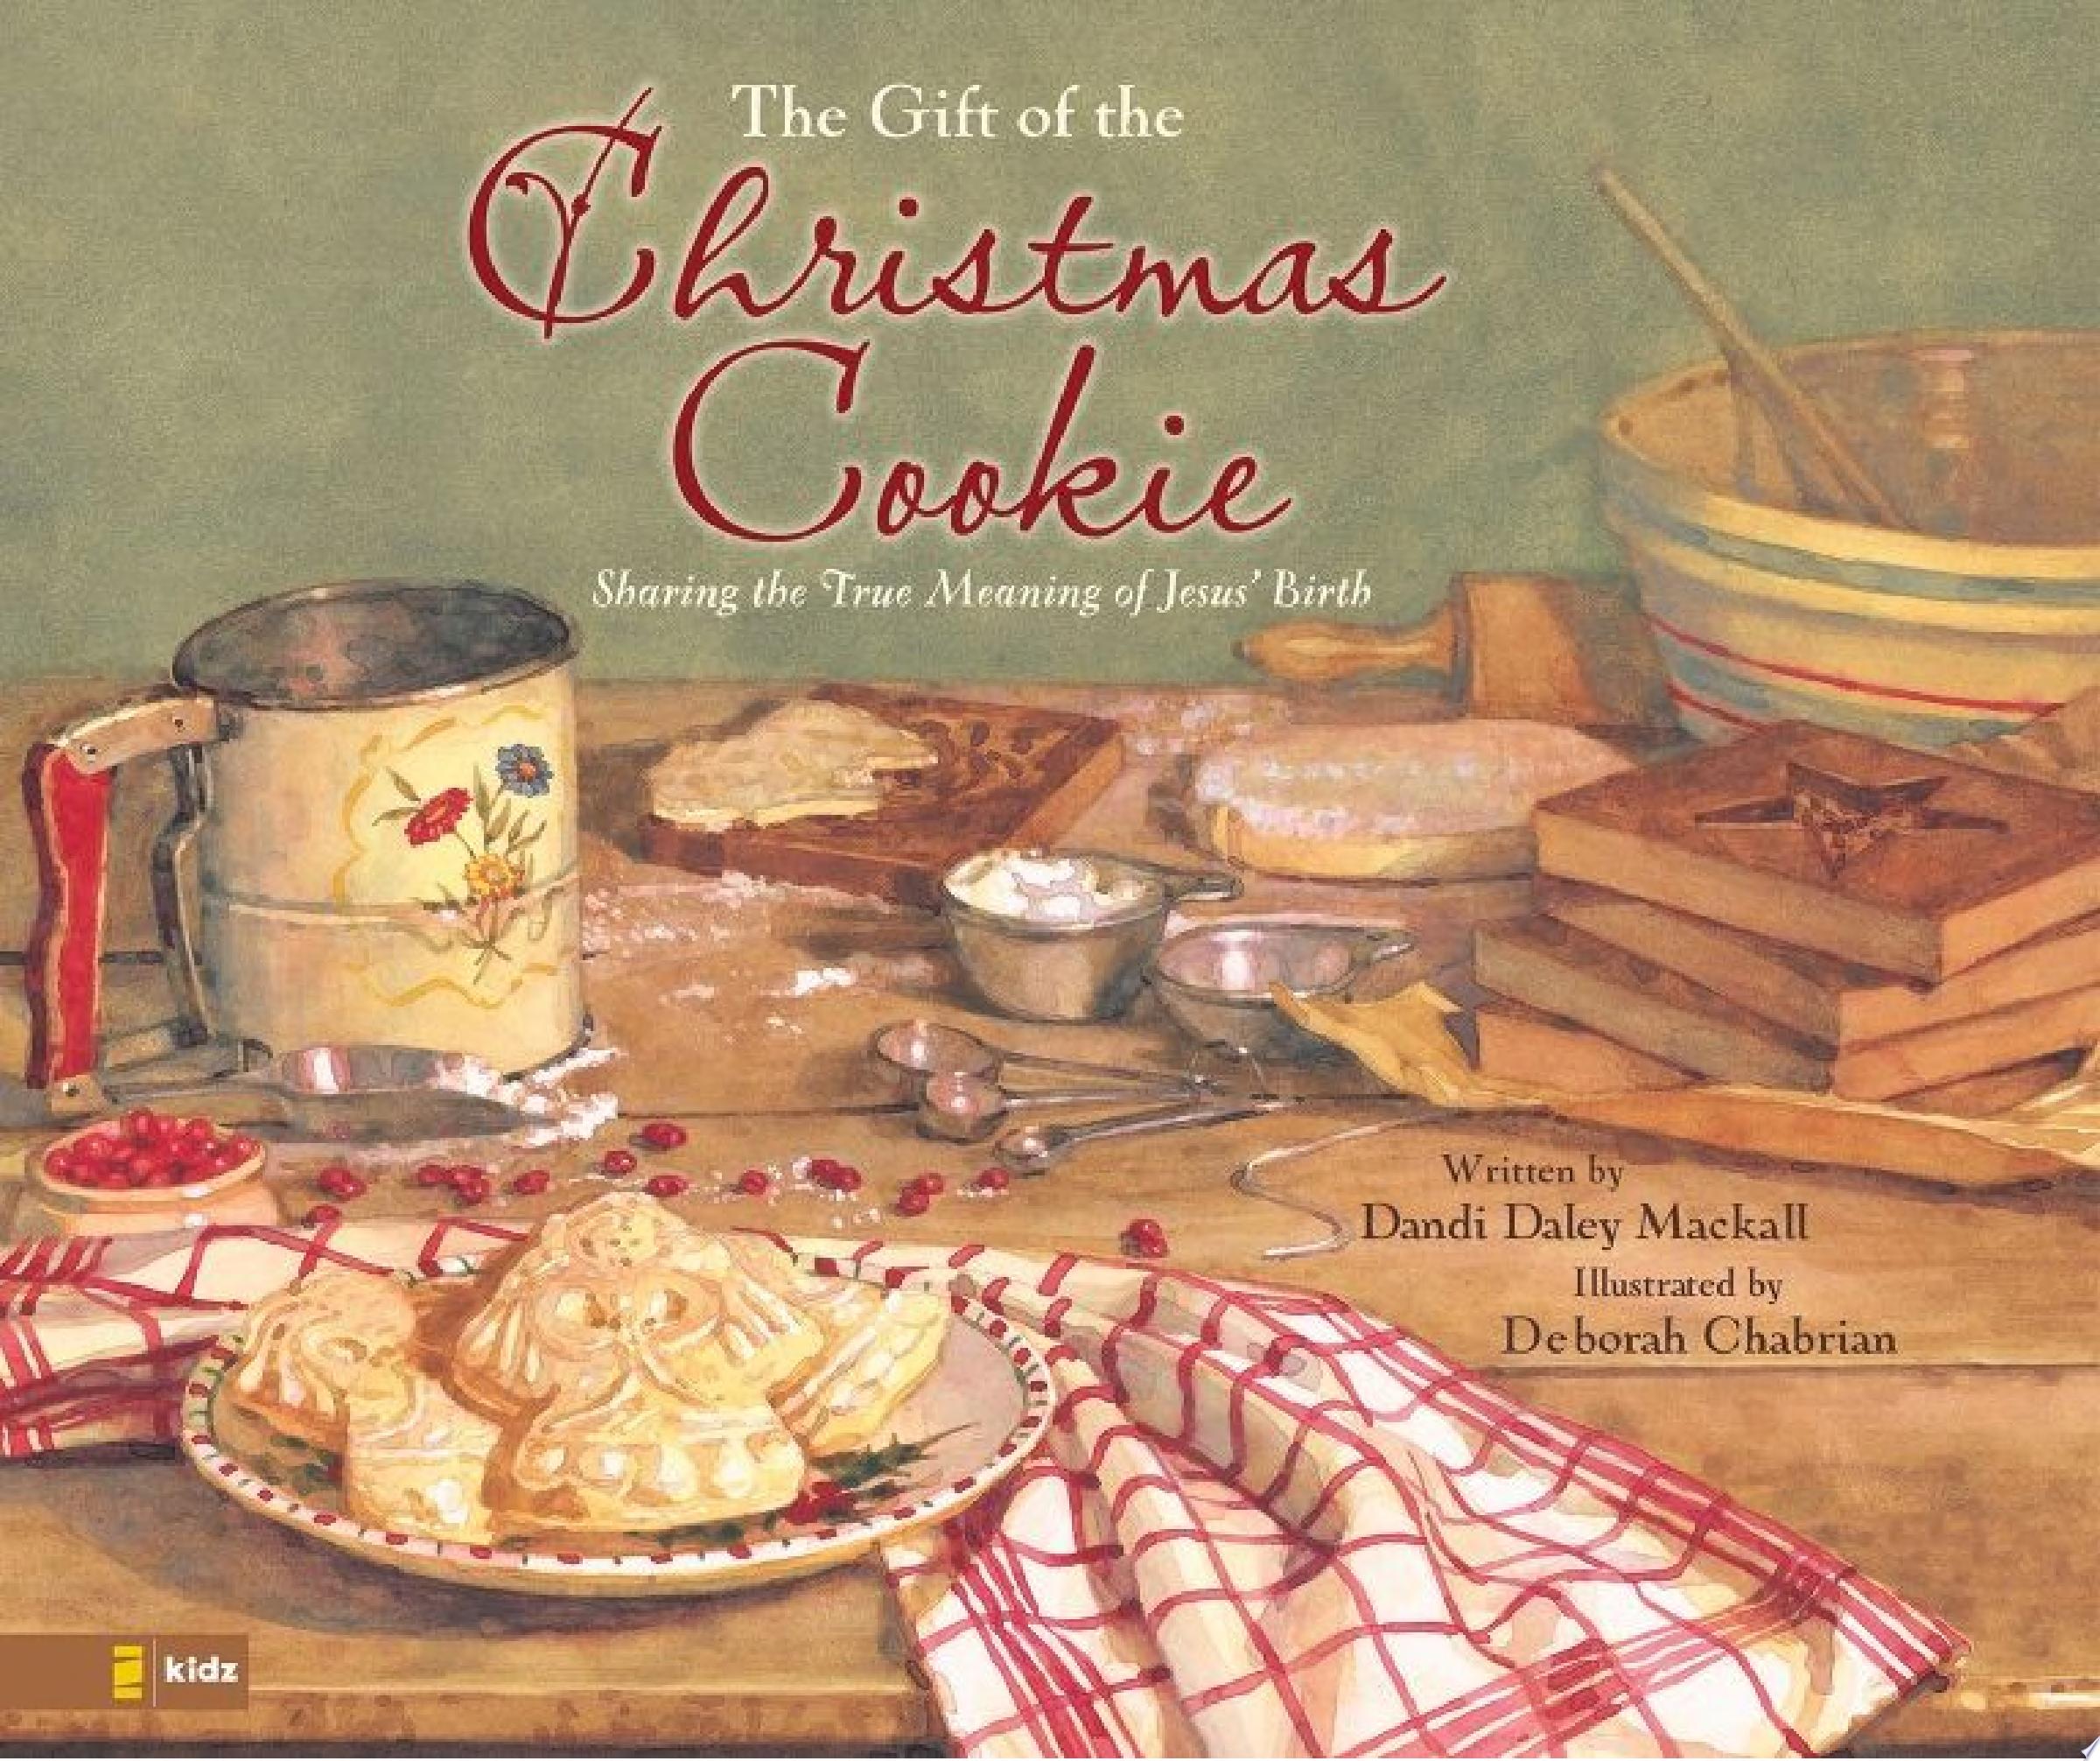 Image for "Gift of the Christmas Cookie"